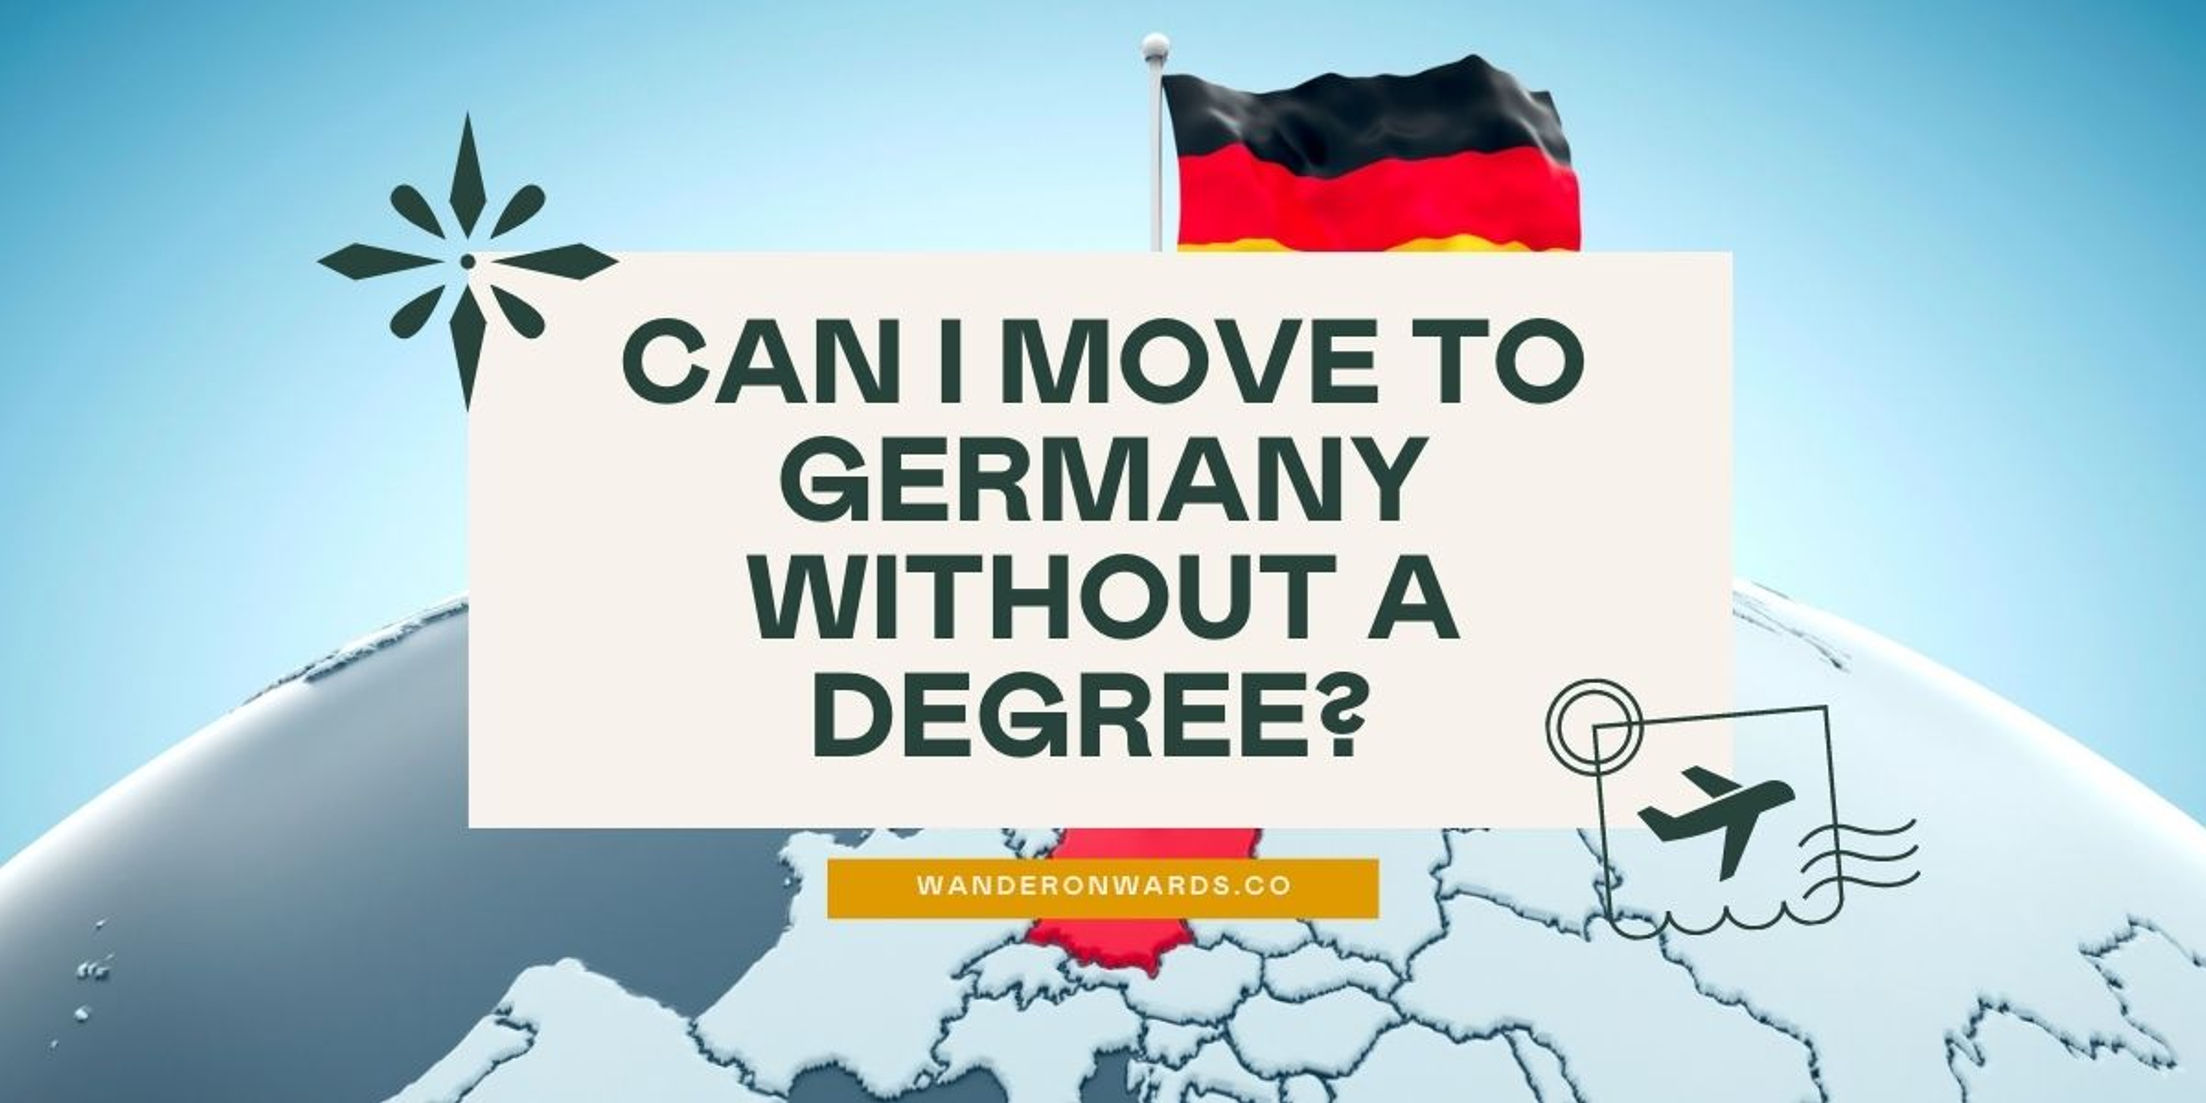 Can You Move to Germany Without a Degree?